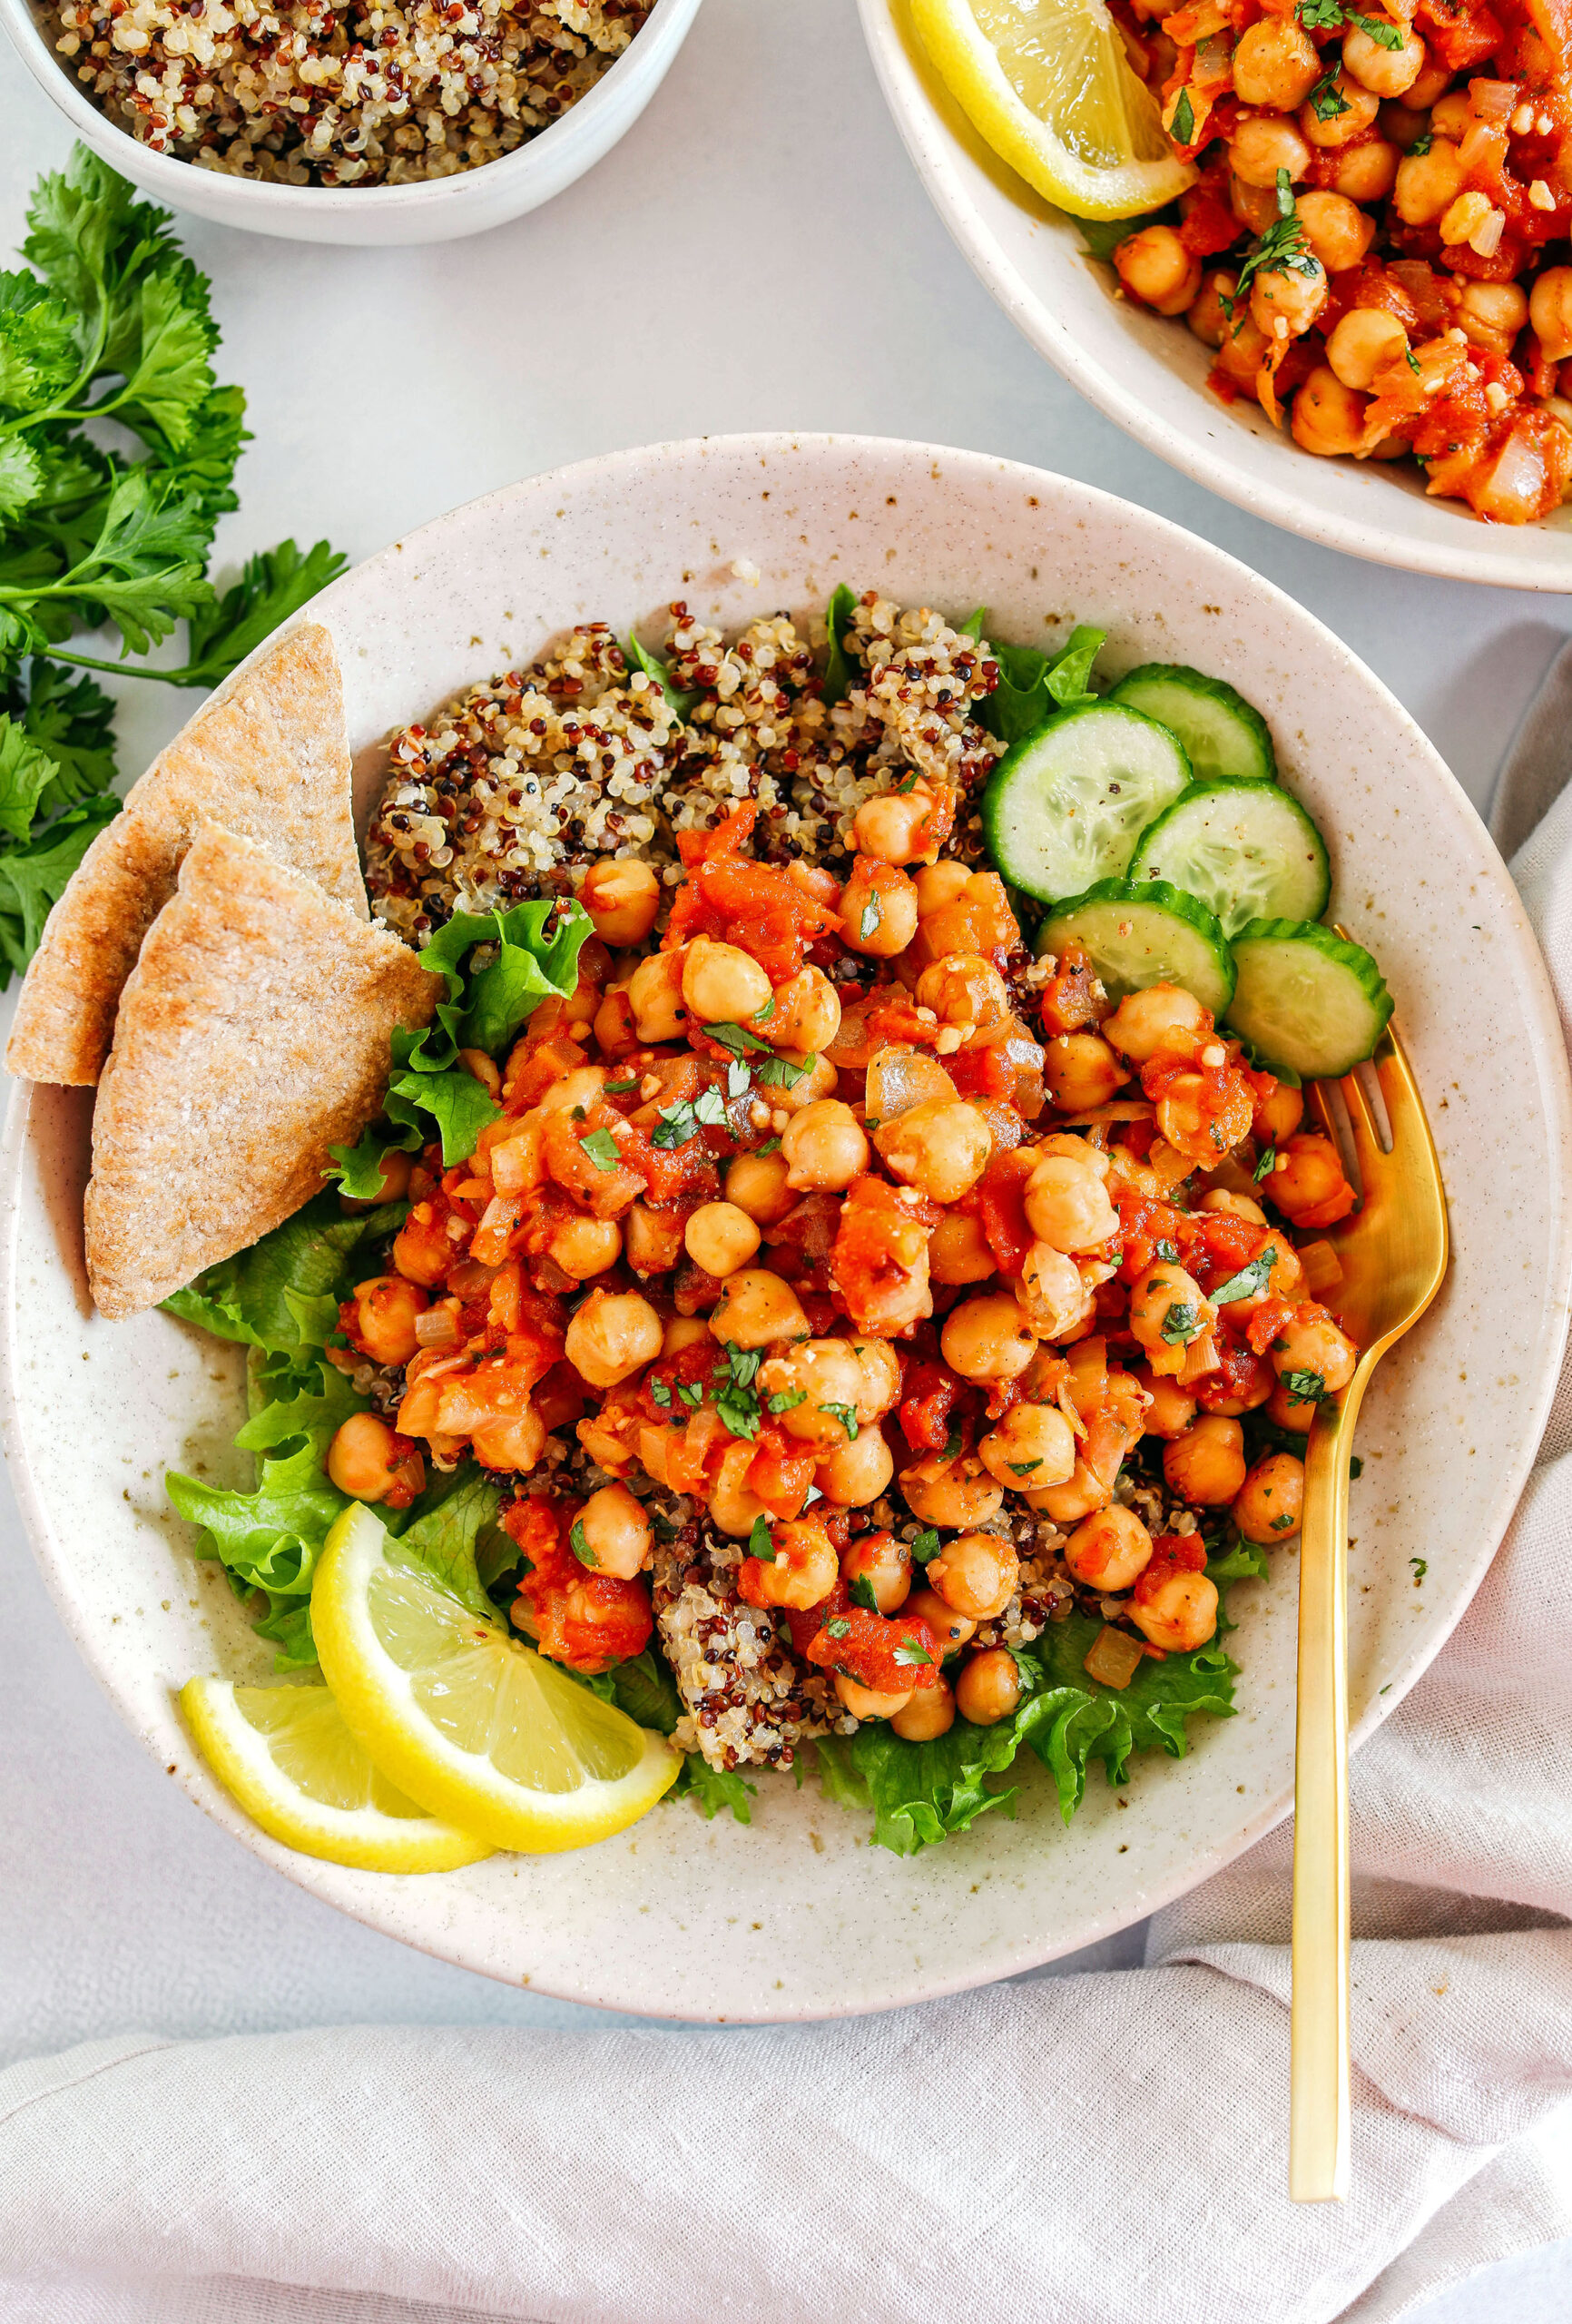 Zesty Quinoa Salad Recipe: Nutritious, Flavorful, and Perfect for Meal Prep